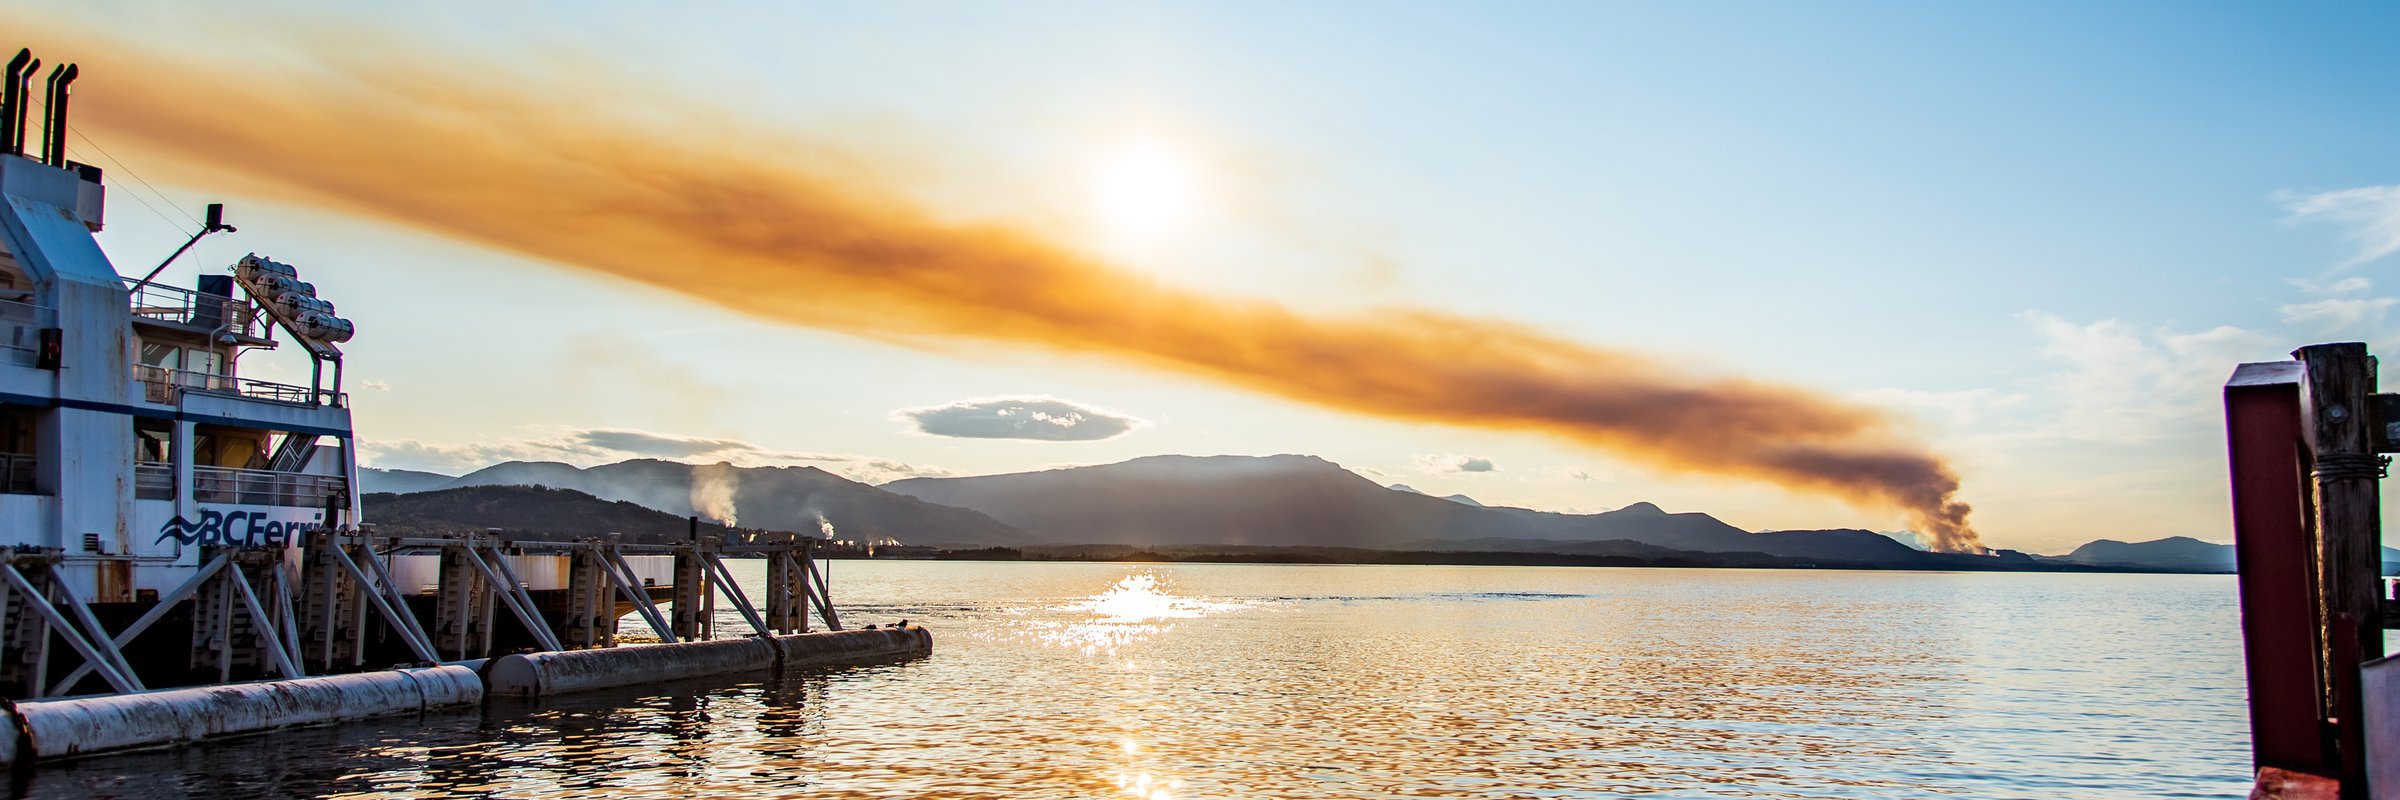 How to make sense of wildfire smoke and interpret data in real time